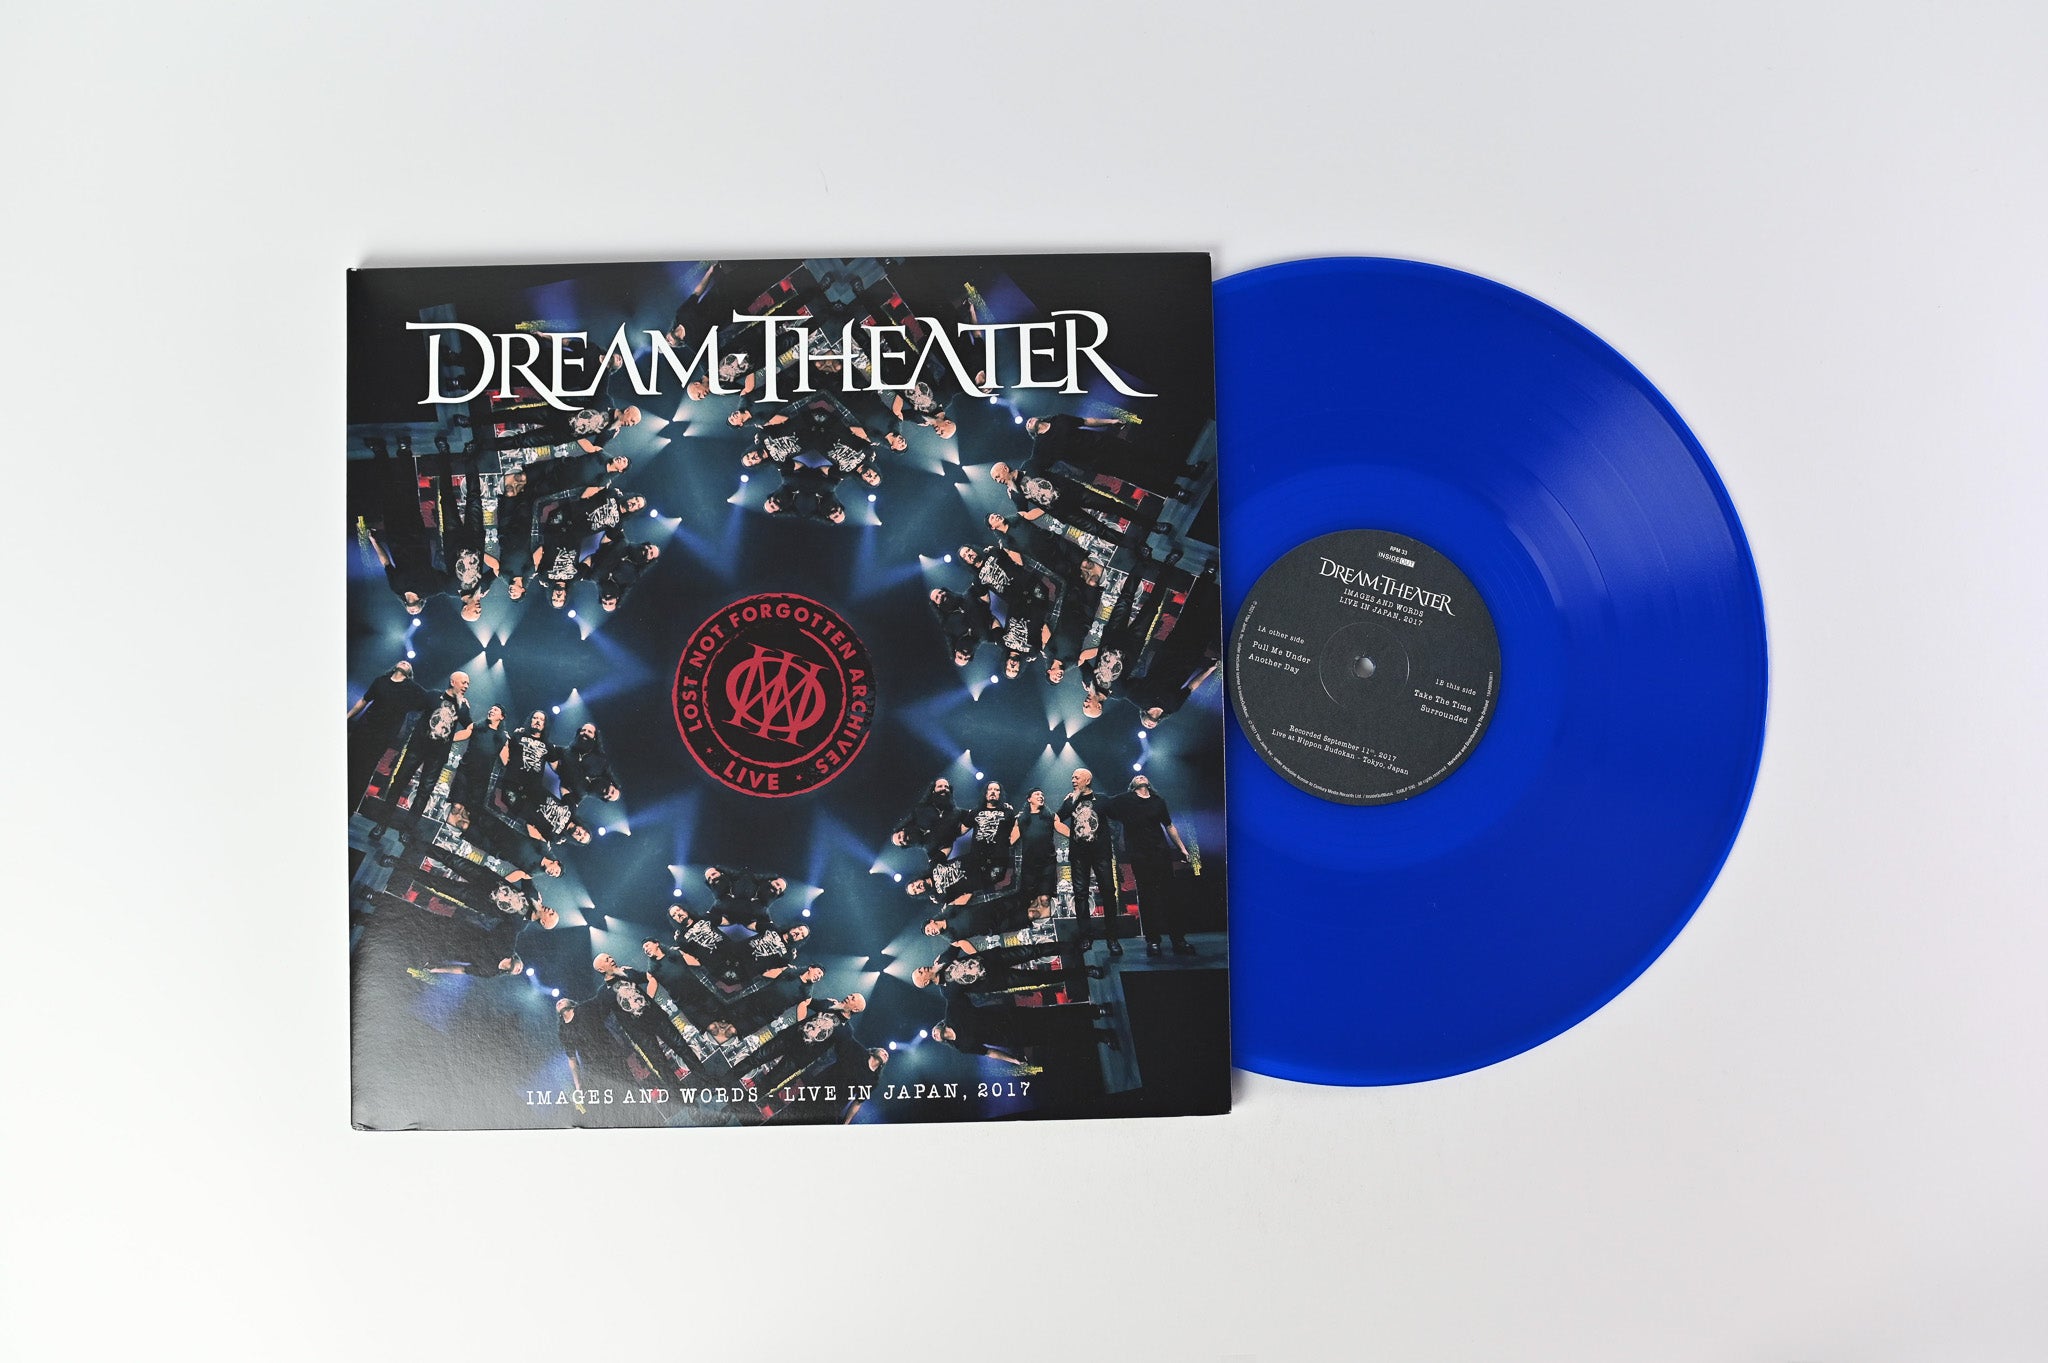 Dream Theater - Images And Words - Live In Japan, 2017 on Inside Out Ltd Cobalt Blue